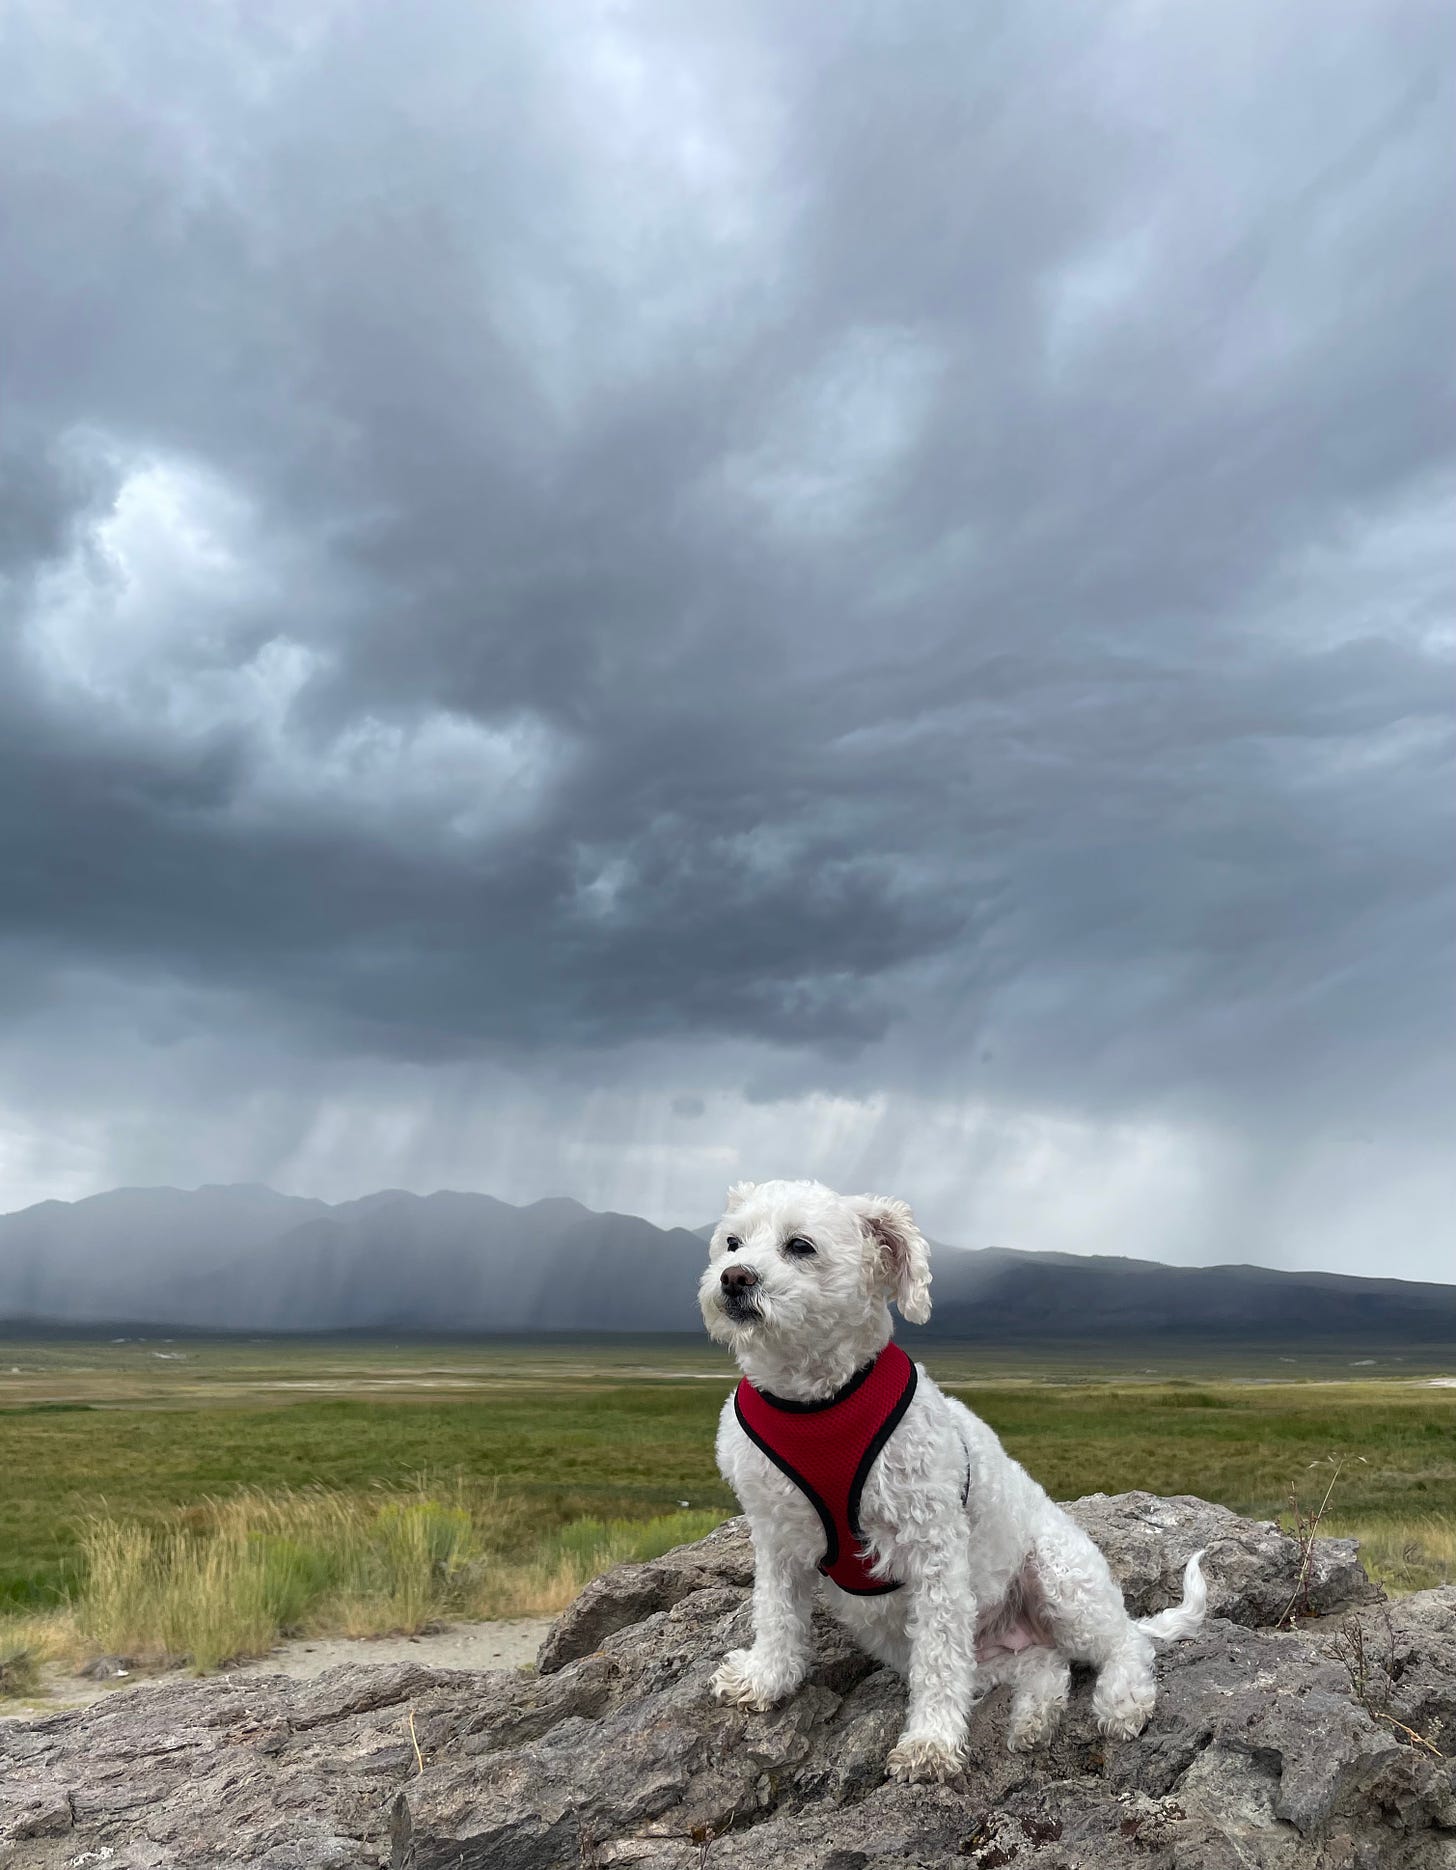 A small white dog in a red harness in the foreground, a dark grey overcast sky and mountains in the distance